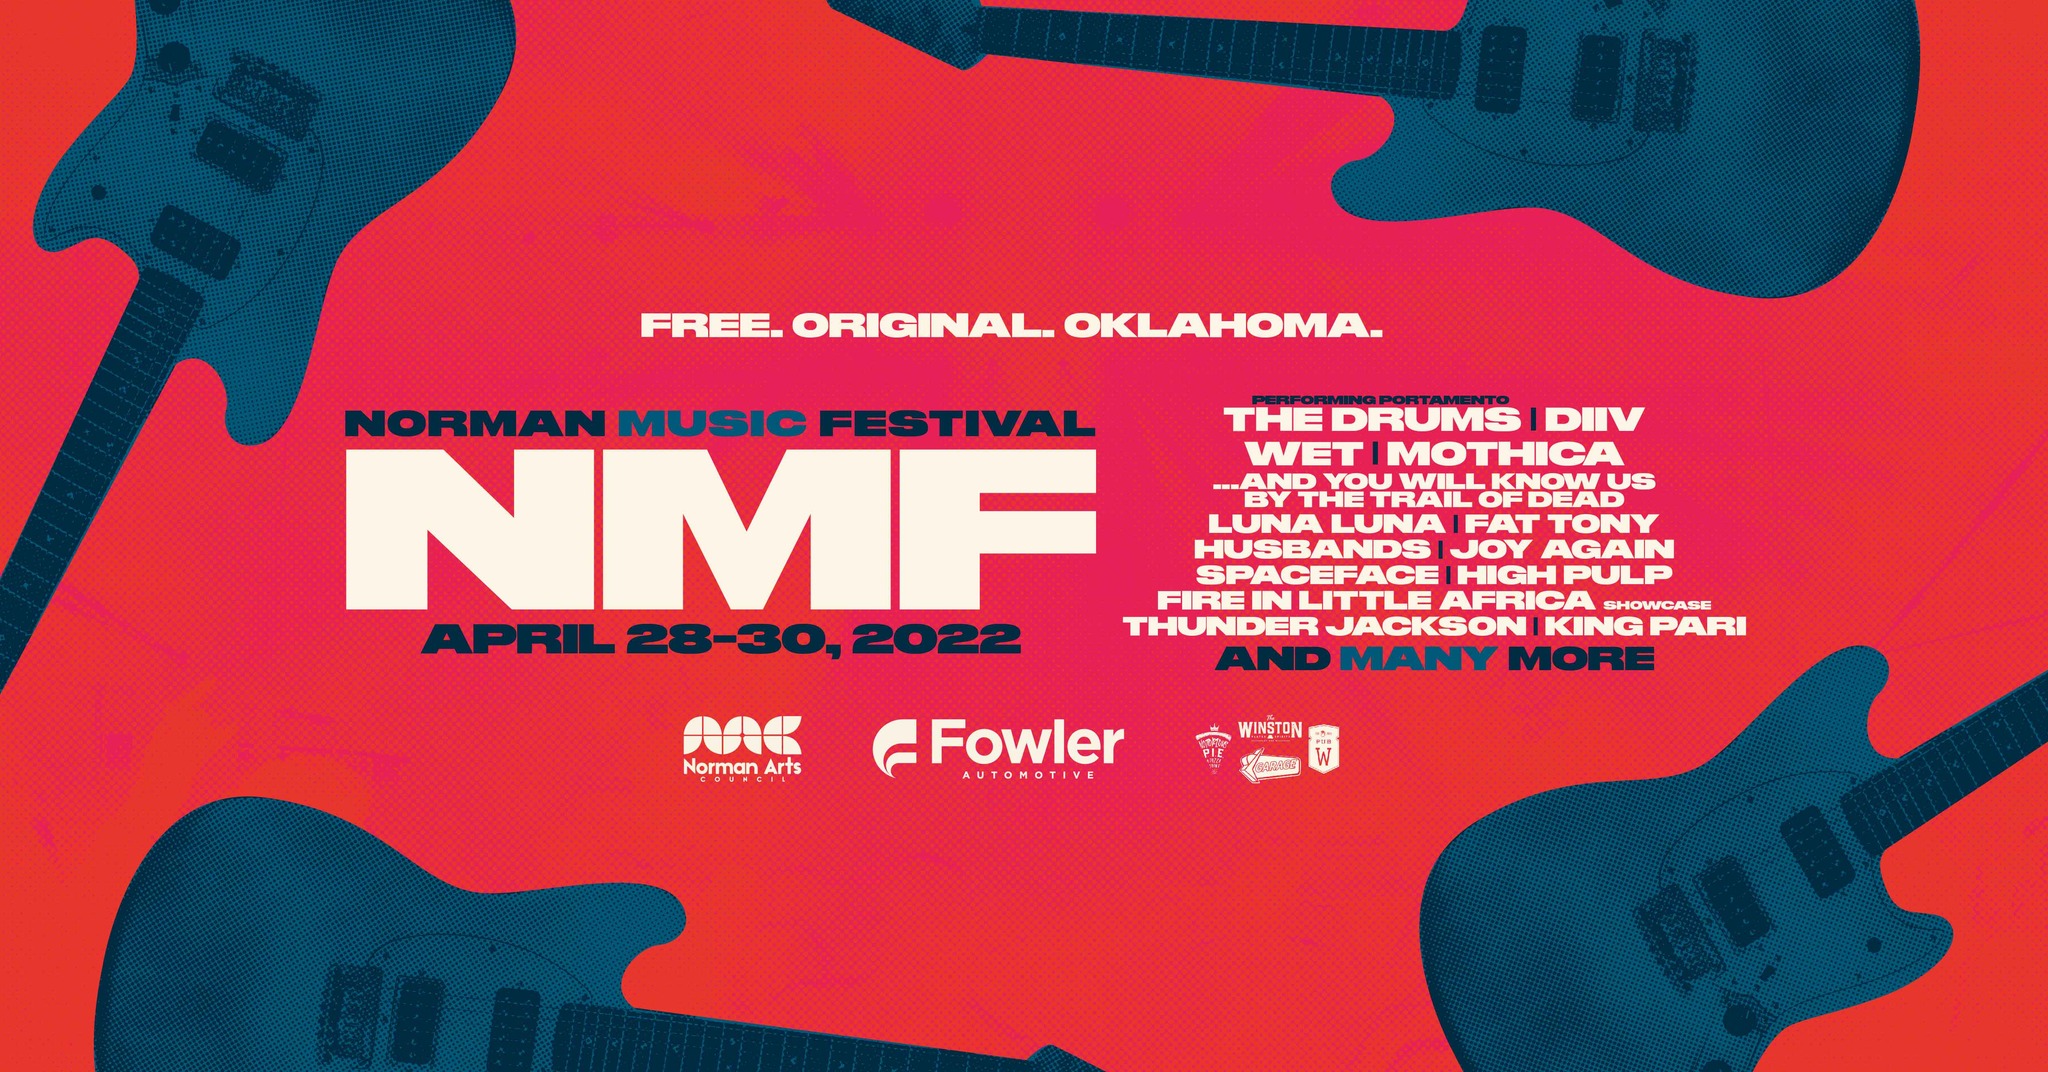 Your Guide to Norman Music Festival 2022 91.3 KRSCFM Real College